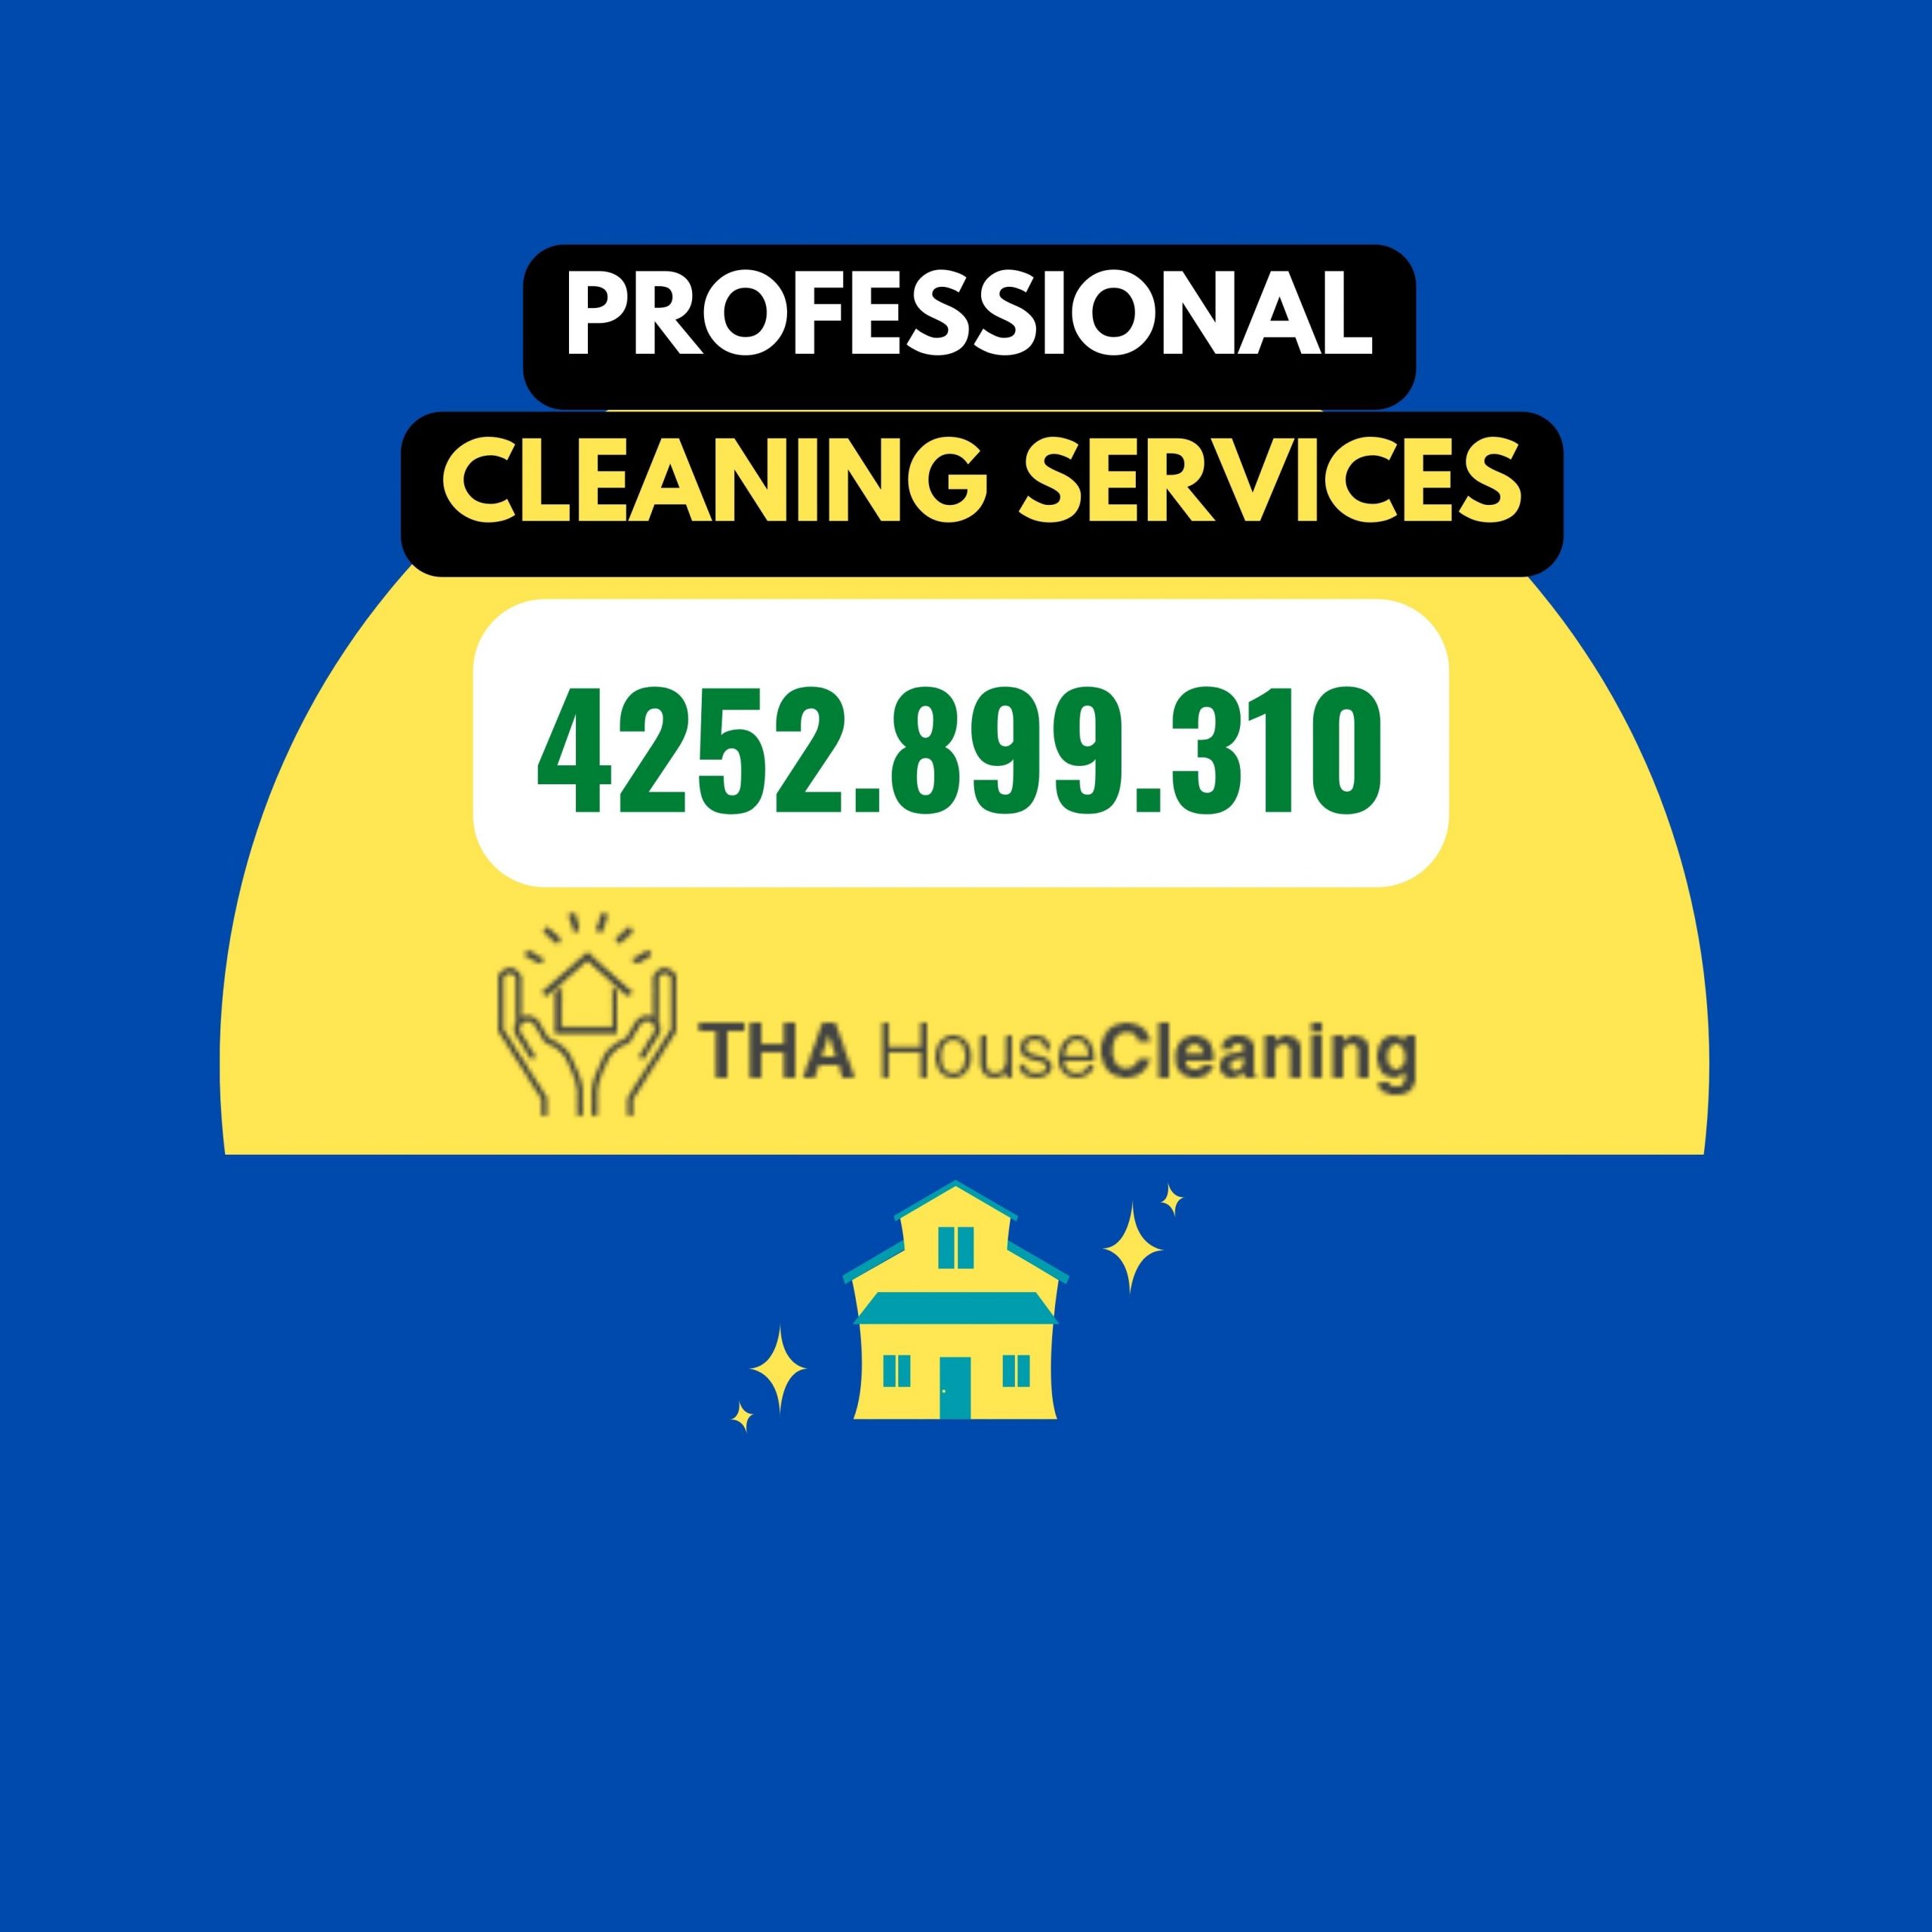 Cleaner Services